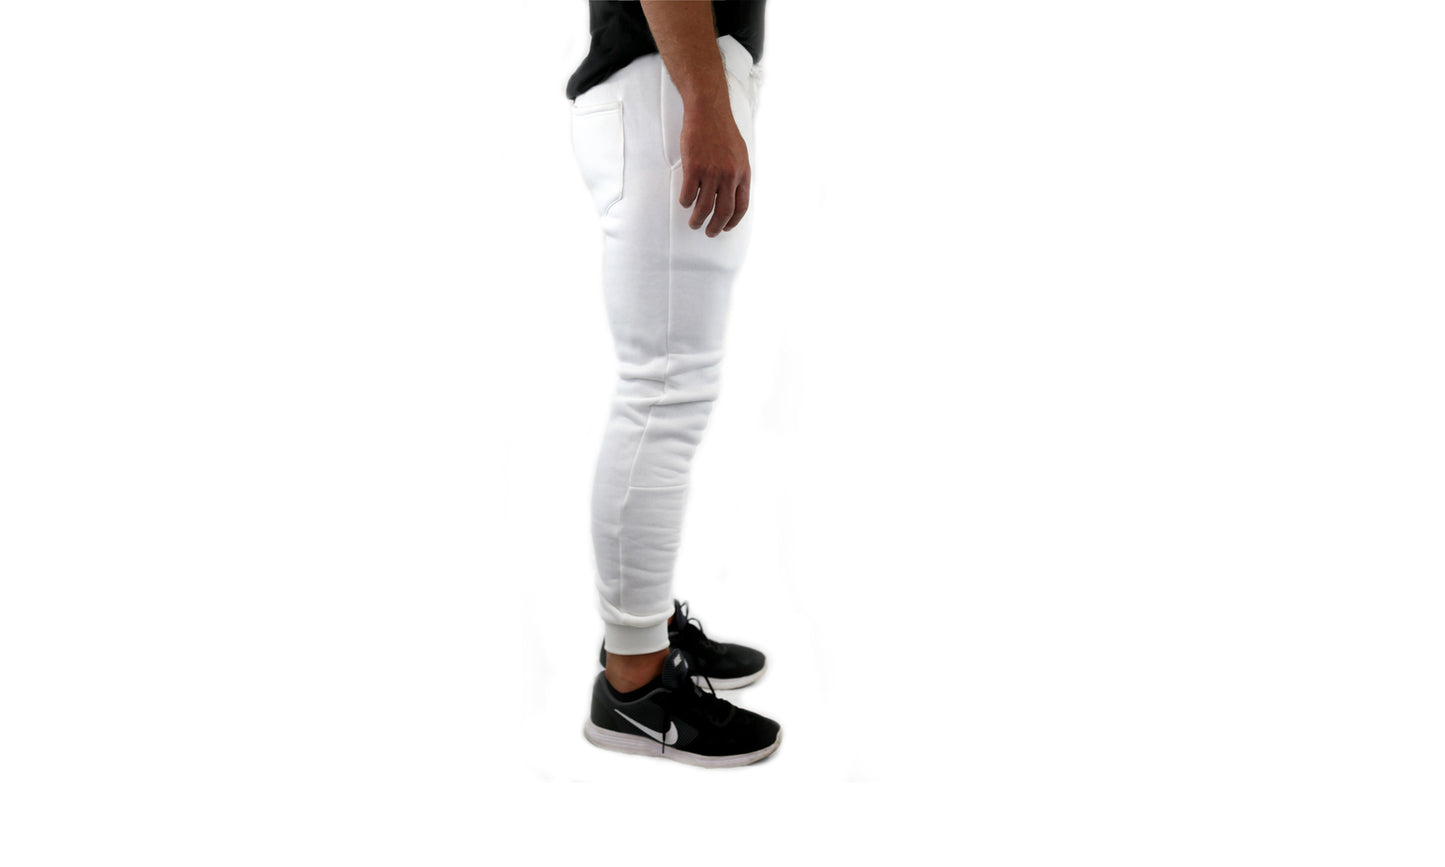 Mens Skinny Track Pants Joggers Trousers Gym Casual Sweat Cuffed Slim Trackies Fleece - White - M